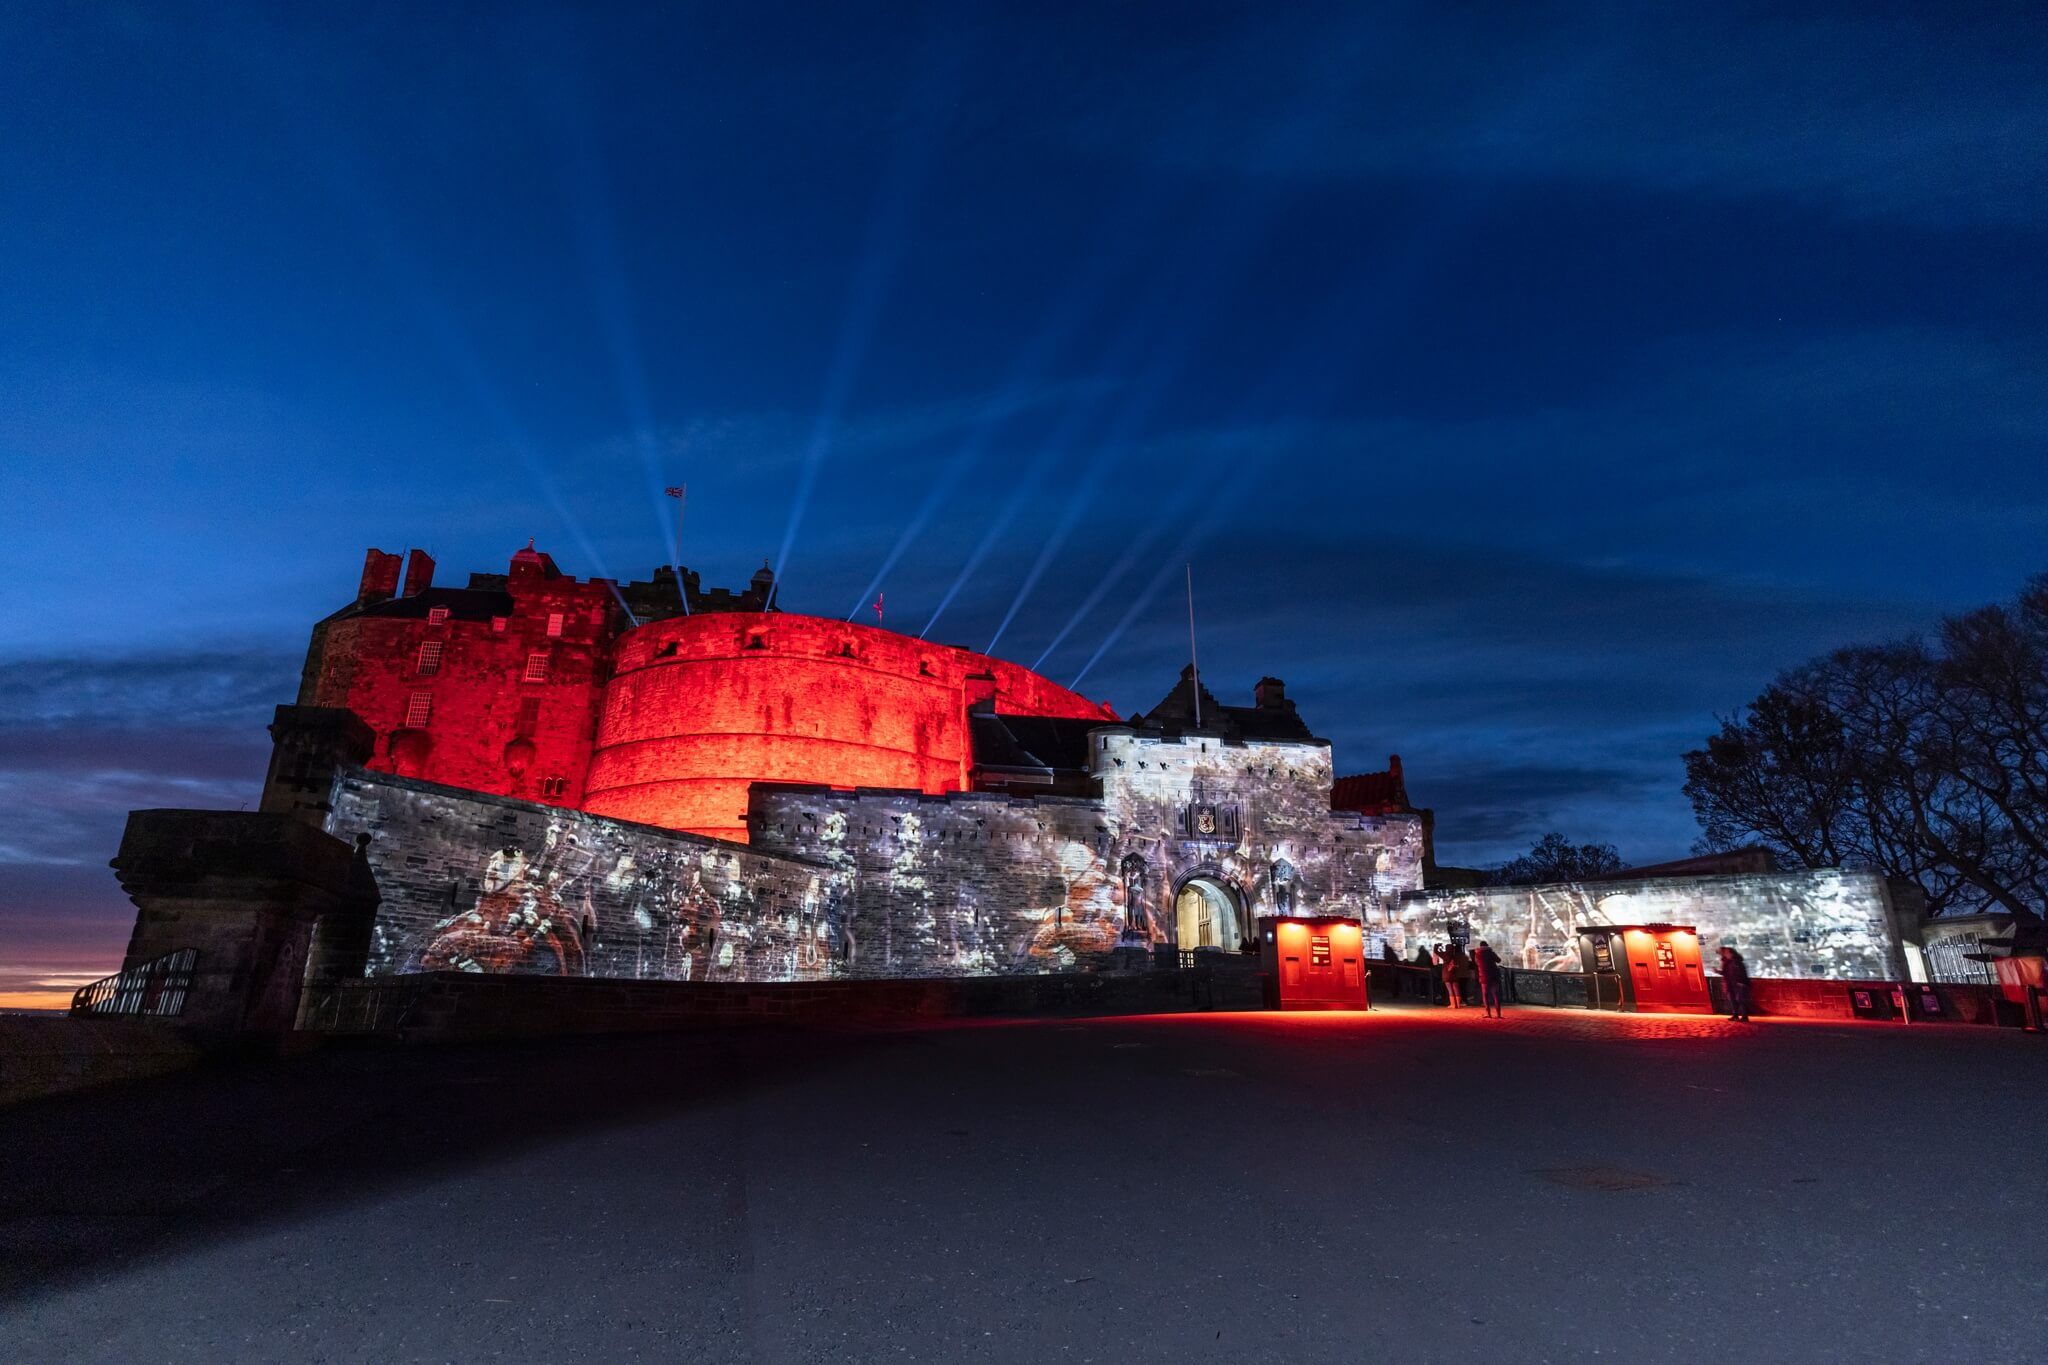 castles to visit in scotland map